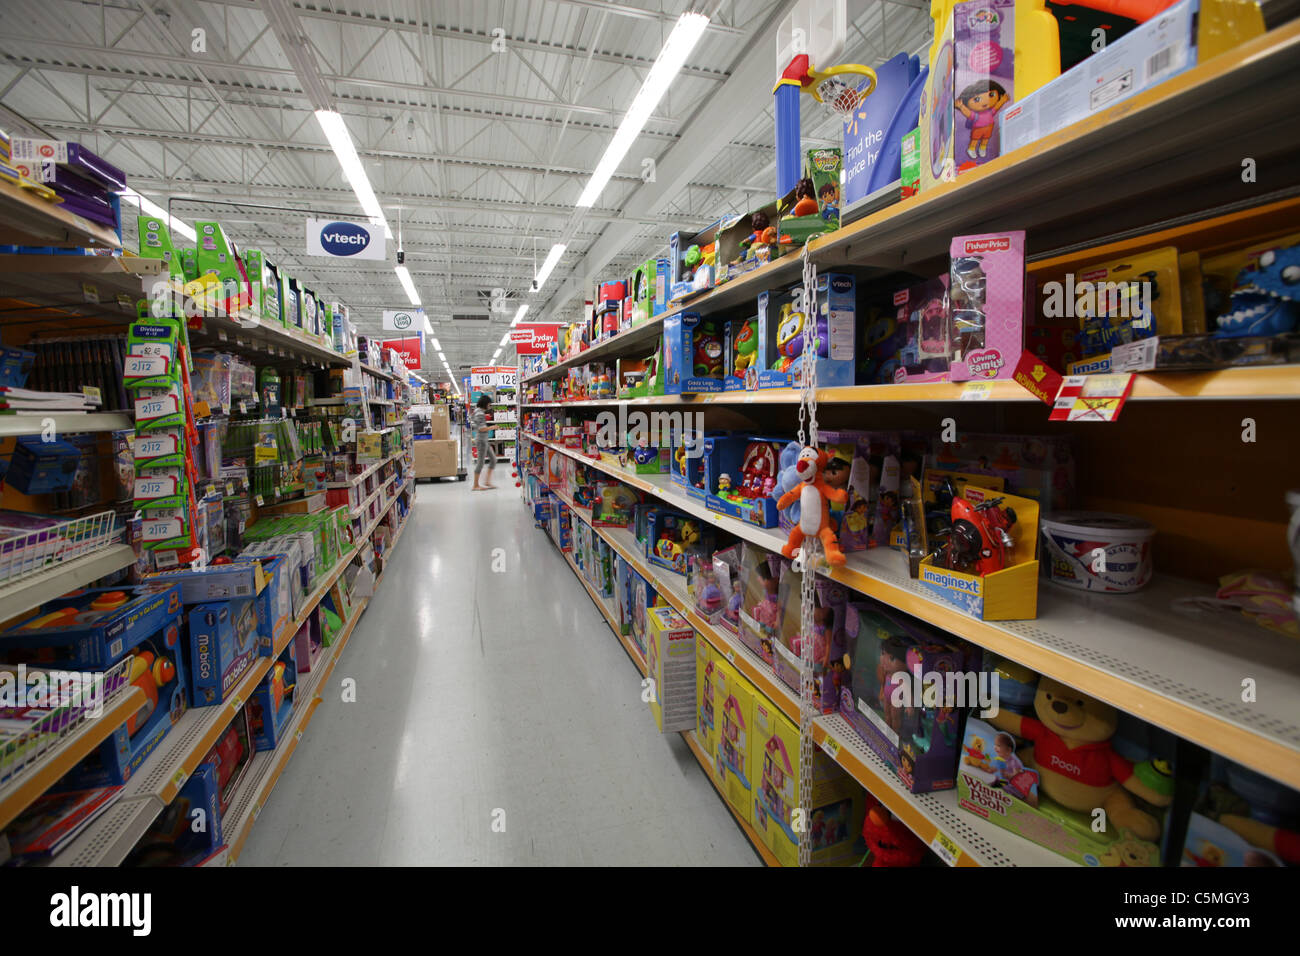 Walmart Toys and Games section in Walmart supercentre in Kitchener Ontario Canada 2011 Stock Photo